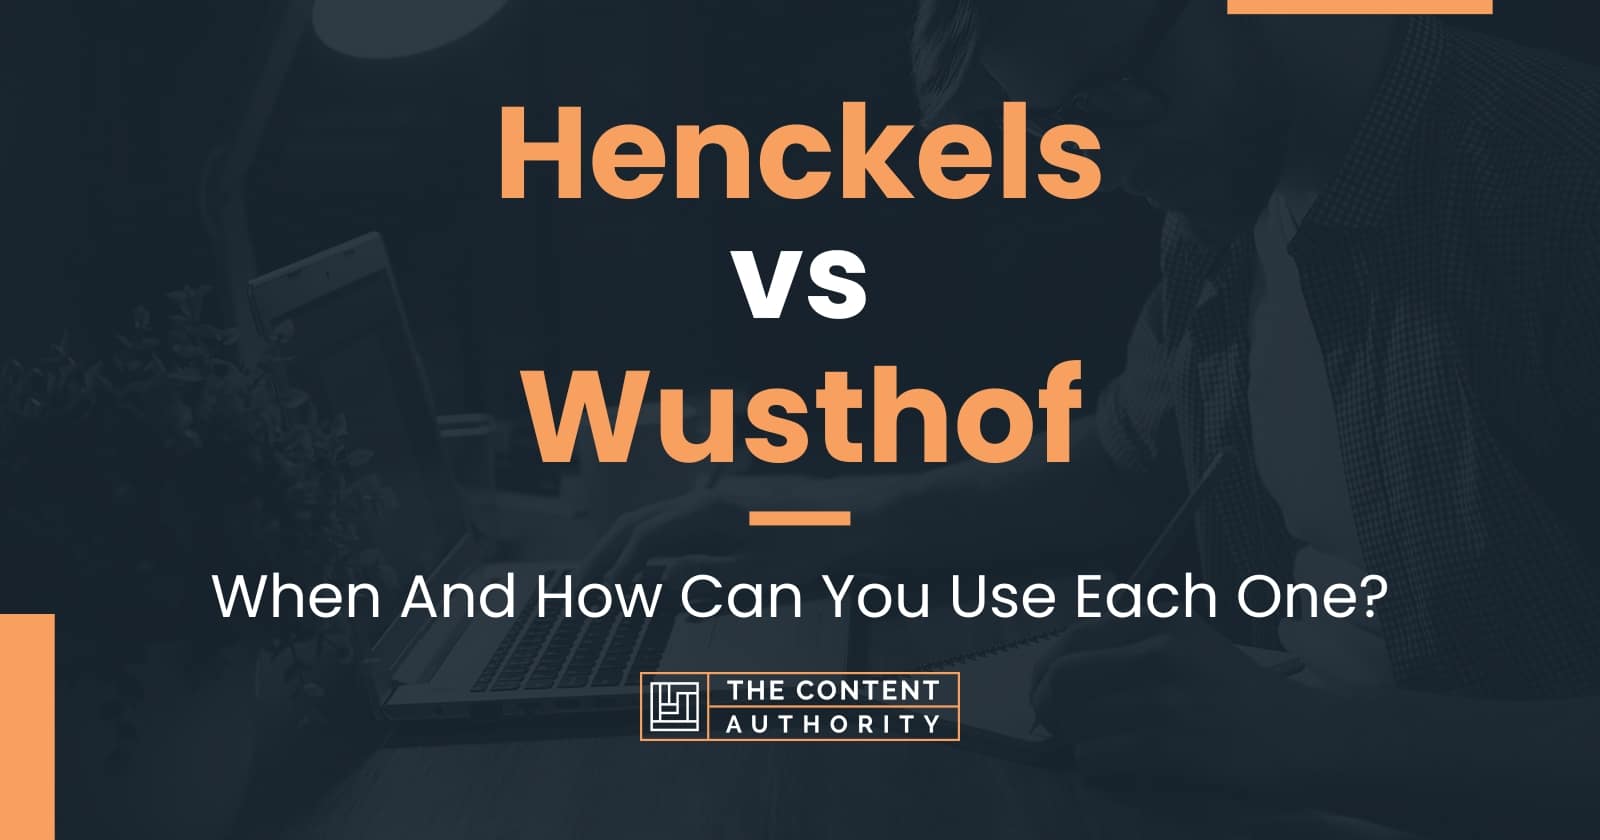 Henckels vs Wusthof: When And How Can You Use Each One?